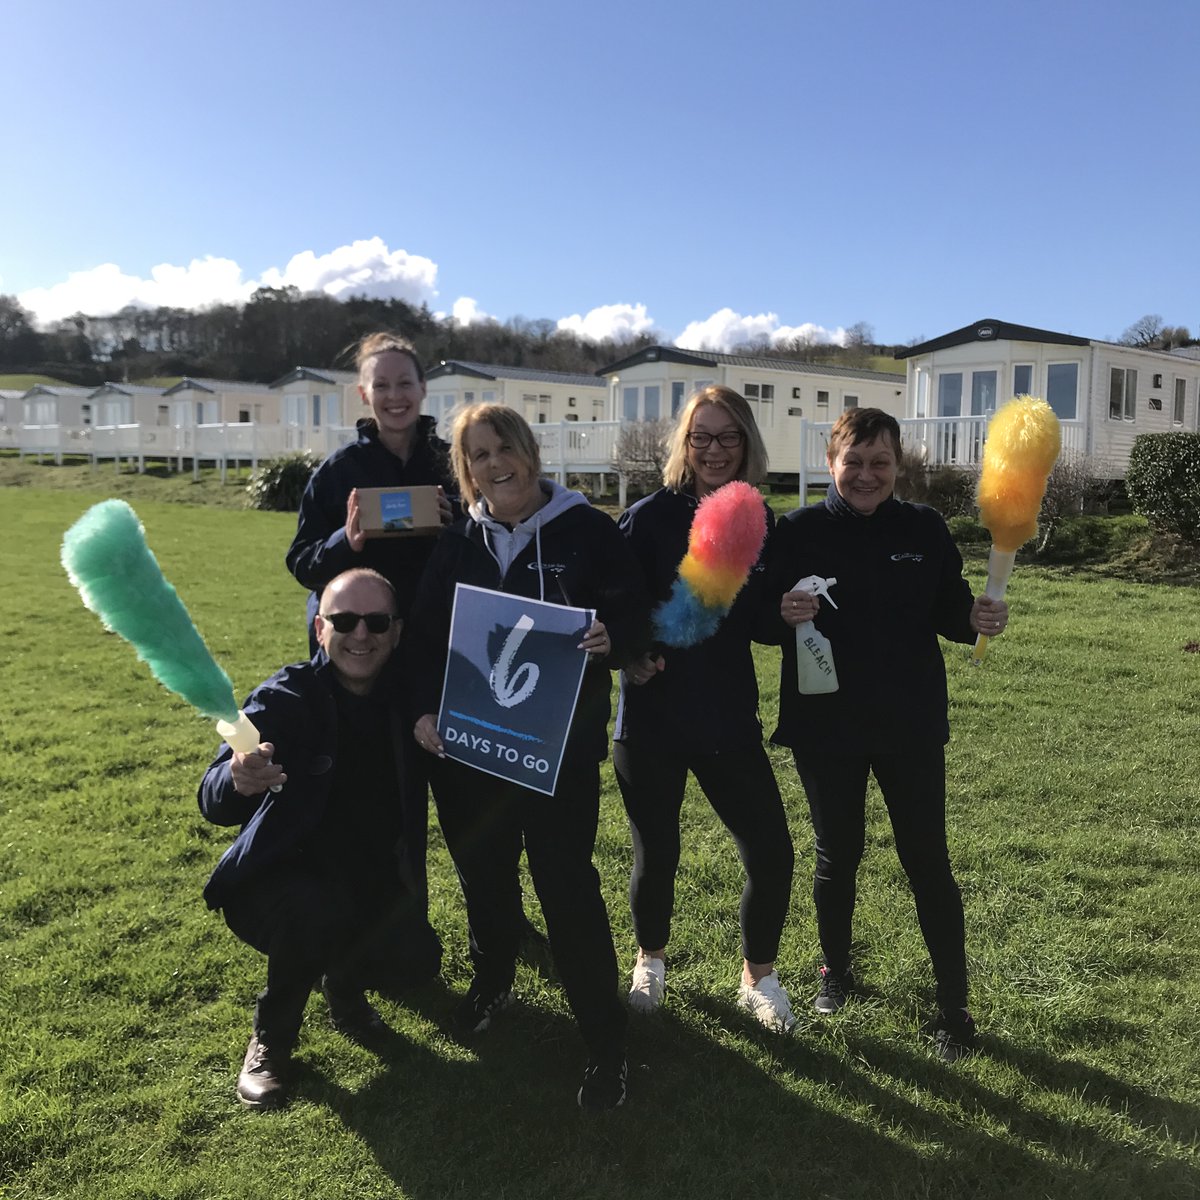 6 days to go! Our efficient and bubbly housekeeping team are on the case - the park and facilities will be in tip-top condition after they've finished! #Ladramcountdown #Ladrambay #Holidaypark